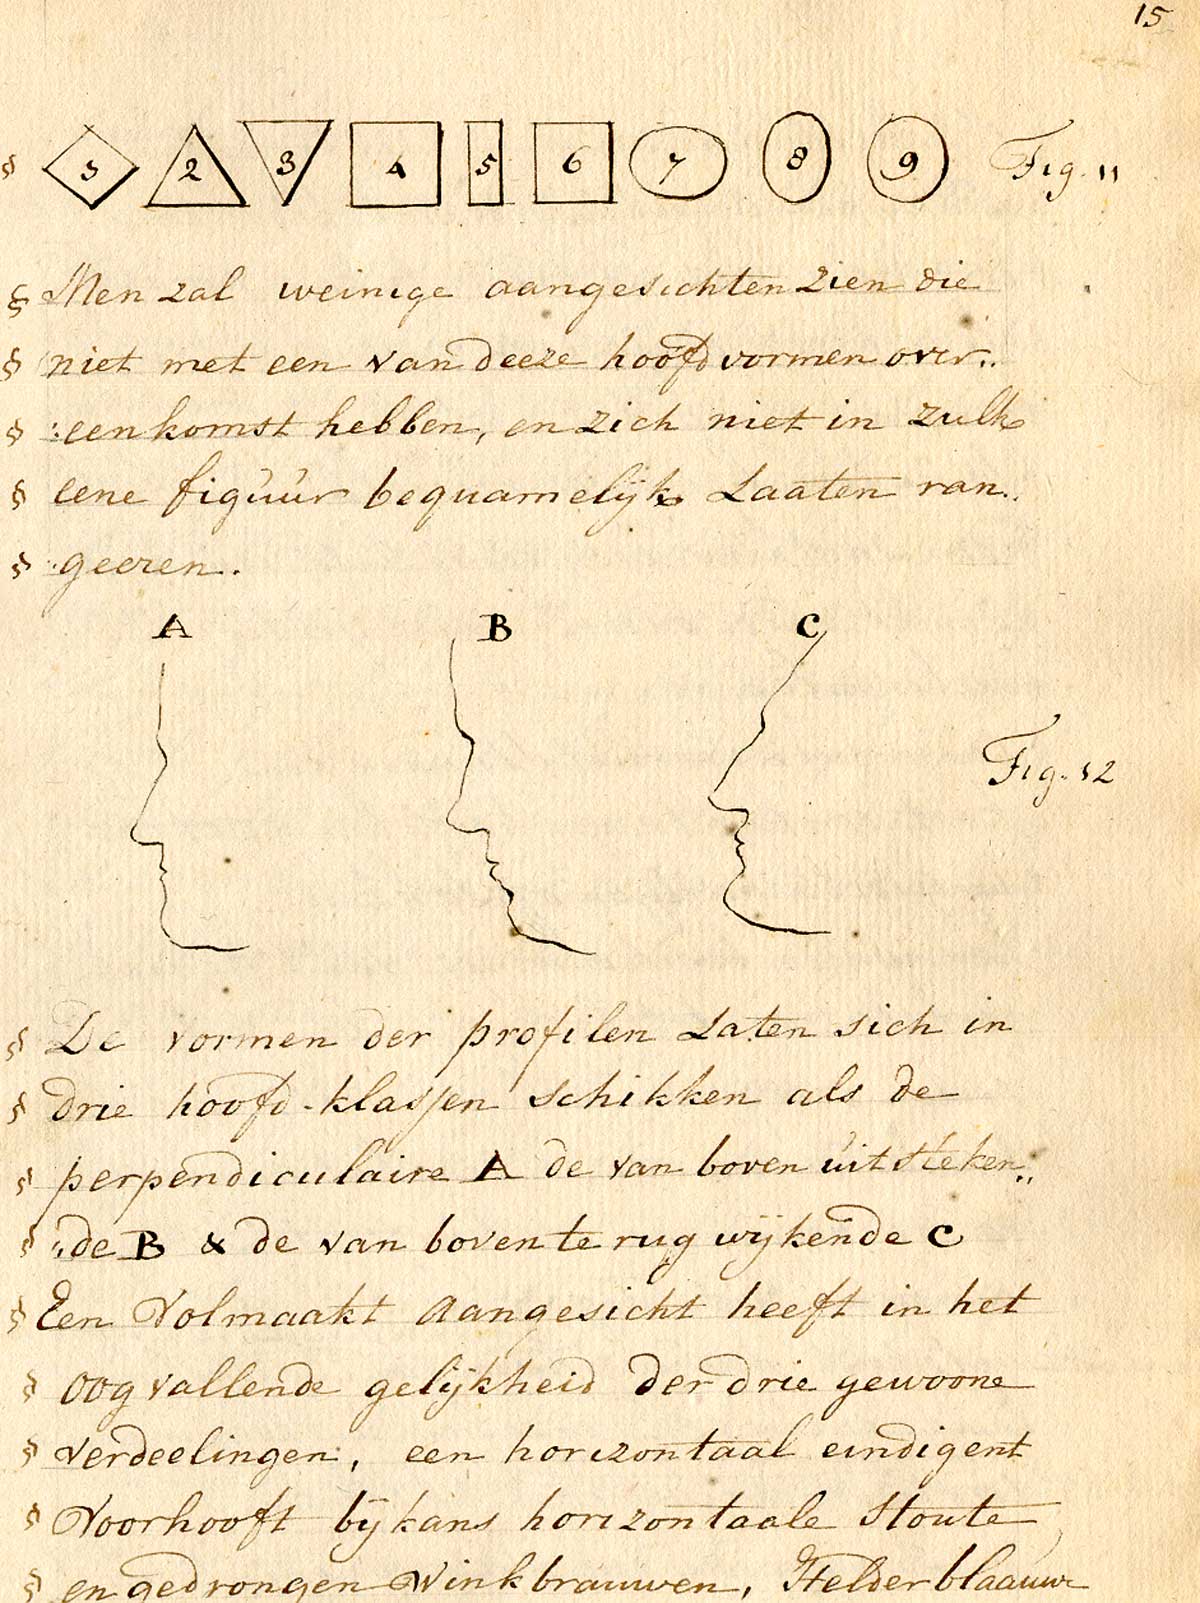 Manuscript drawings of nine geometric shapes across the top of the page including two triangles, three squares, two circles, an oval and a rectangle, and three outlines of faces in profiles with manuscript text in Dutch above and below the profile figures, from Anonymous treatise on physiognomy, NLM call no.: MS B 662.